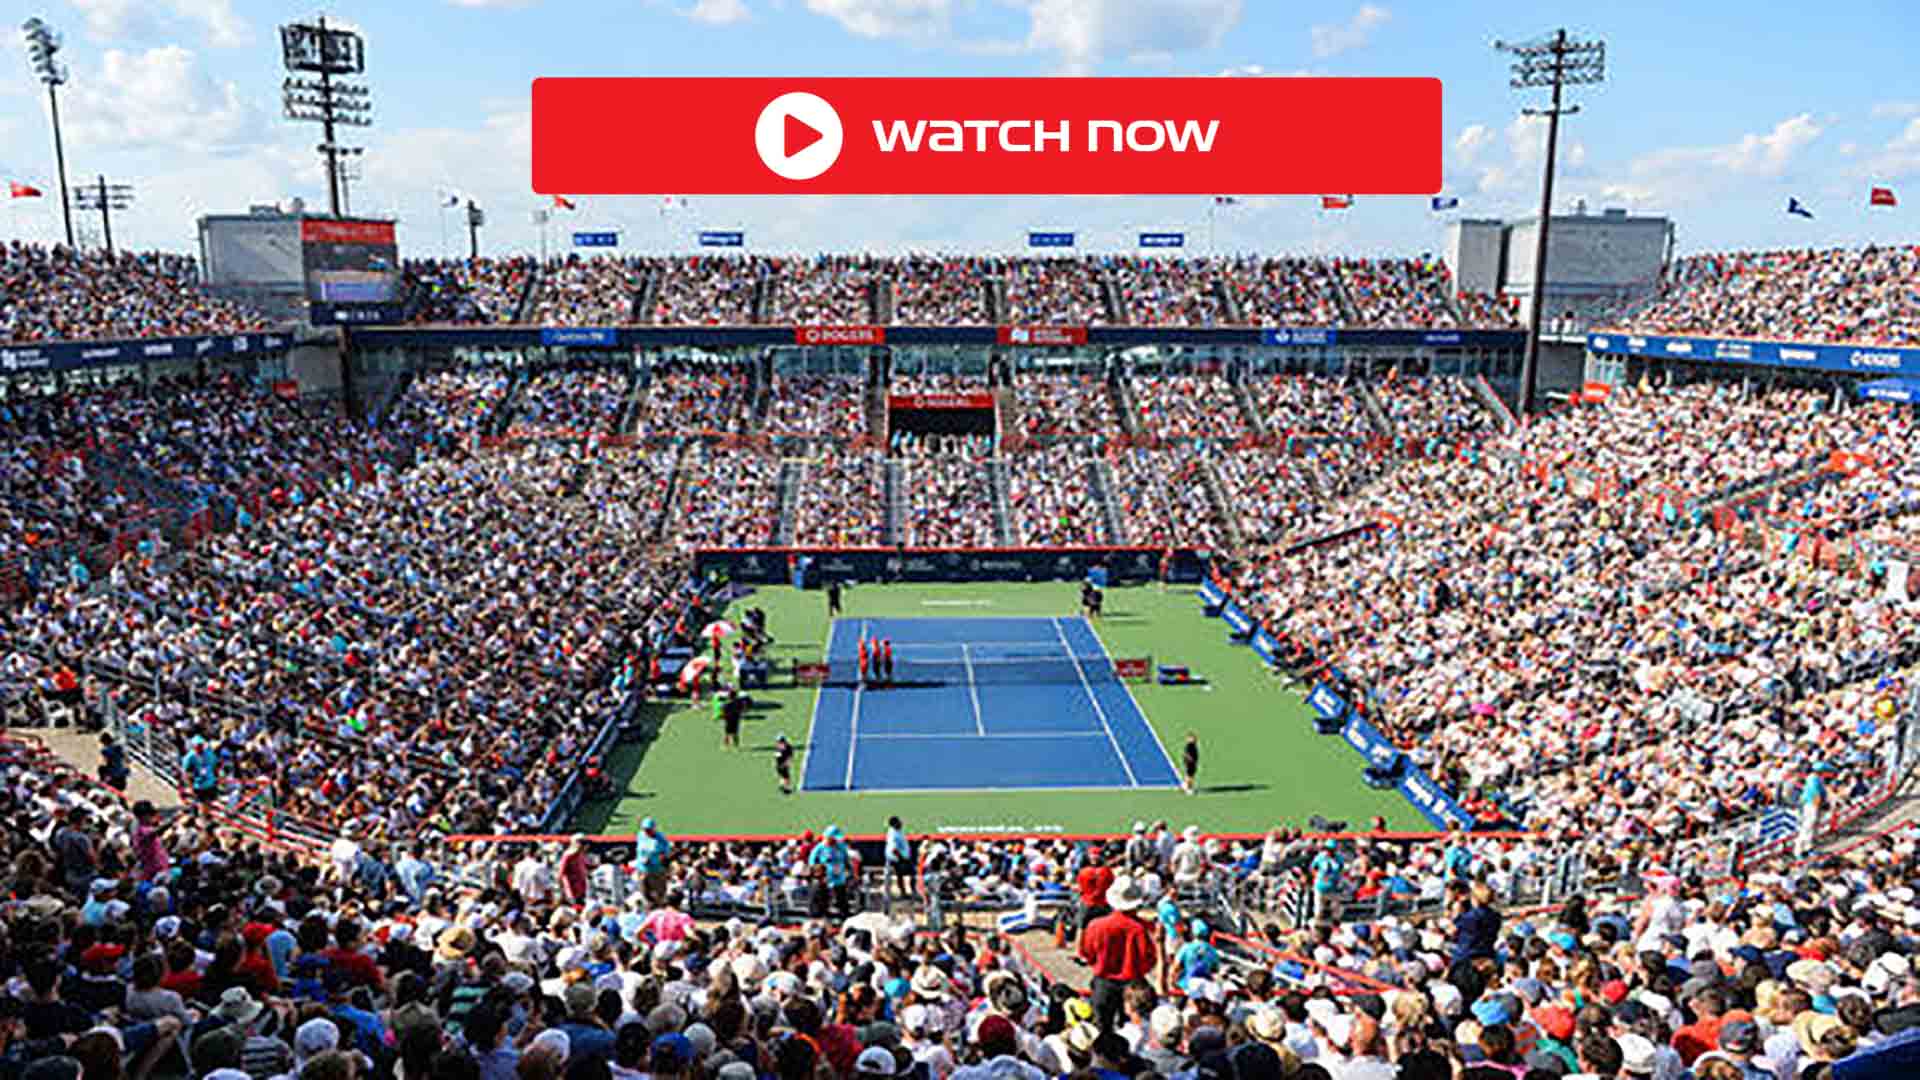 [LIVE] Rogers Cup 2021 Live Stream, TV Coverage, How to Watch Canadian